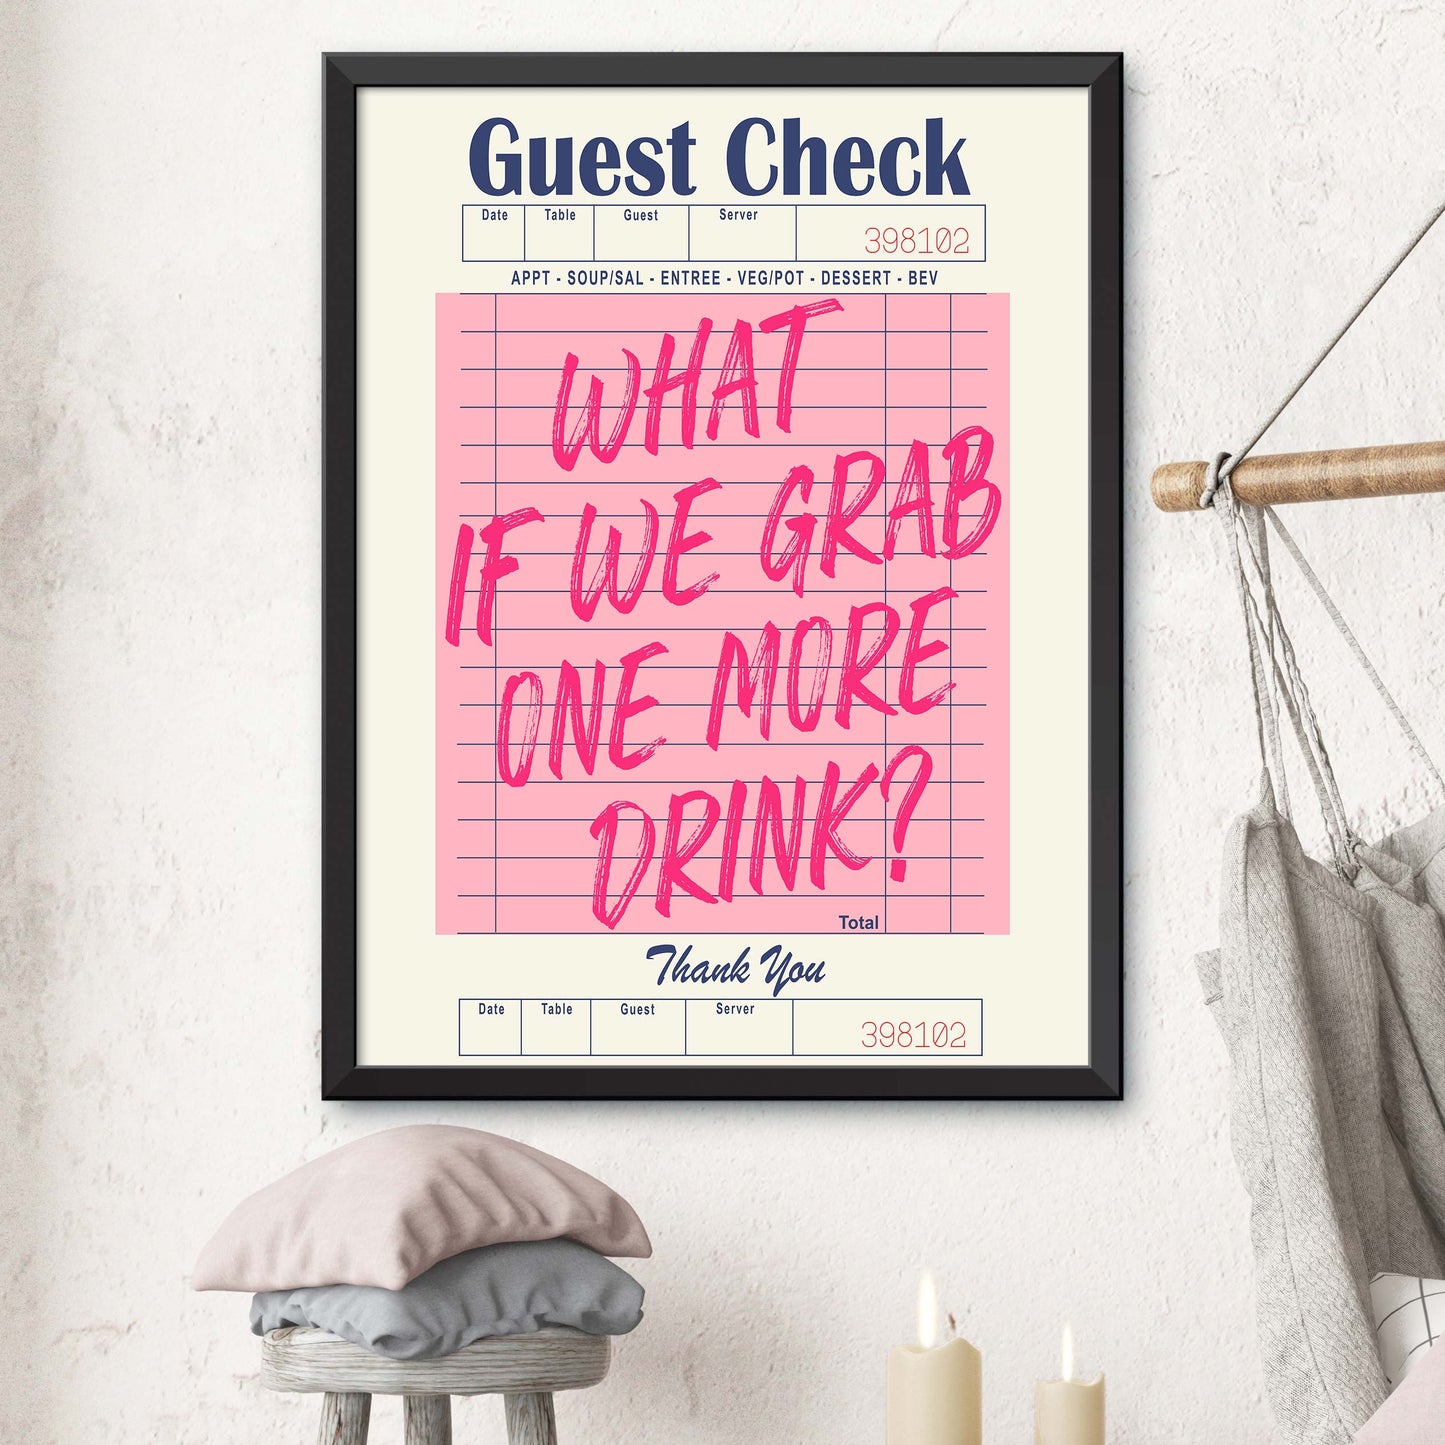 What If We Grab One More Drink!! Pink Poster